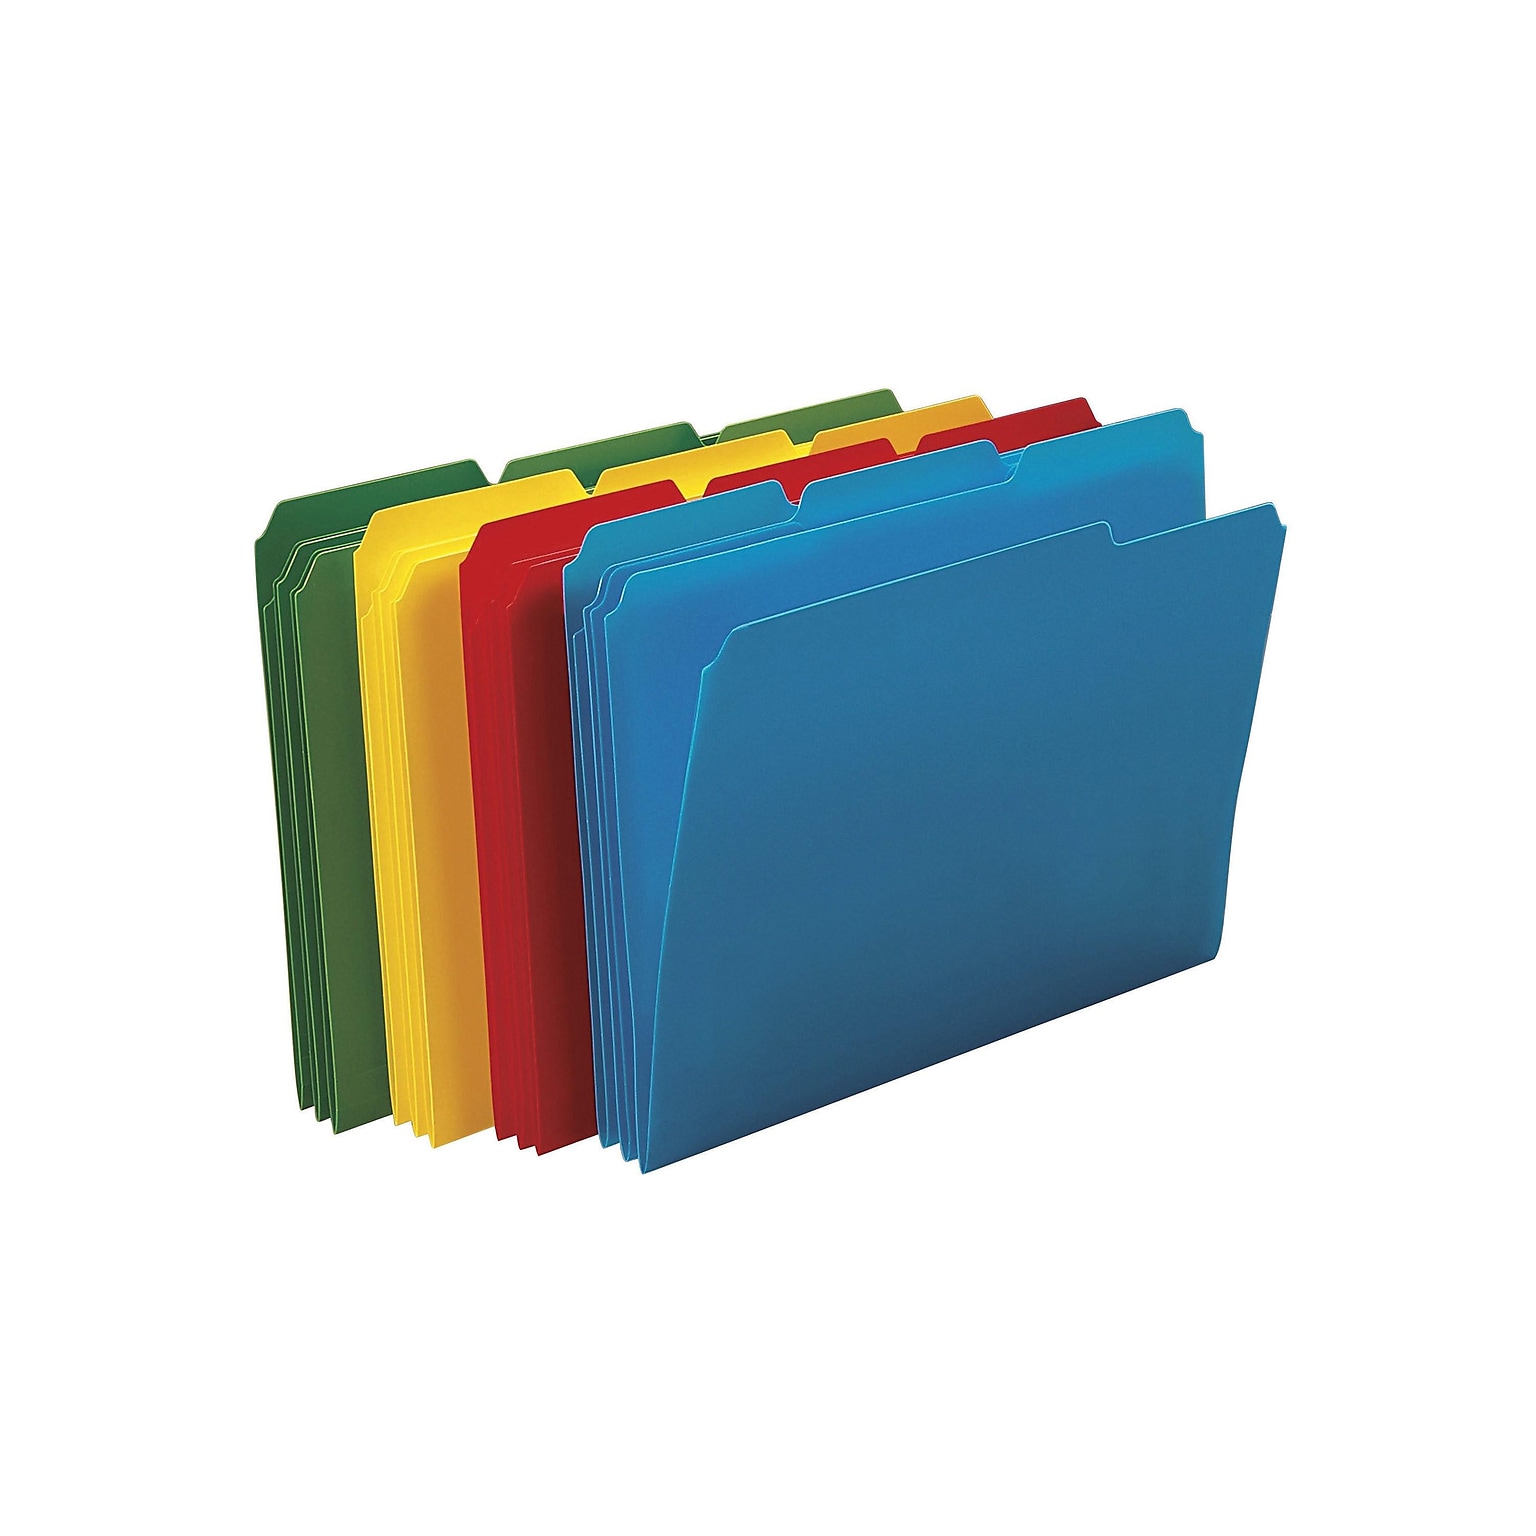 Smead Poly File Folder, 1/3-Cut- Tab Letter Size, Assorted Colors, 24/Box (10500)